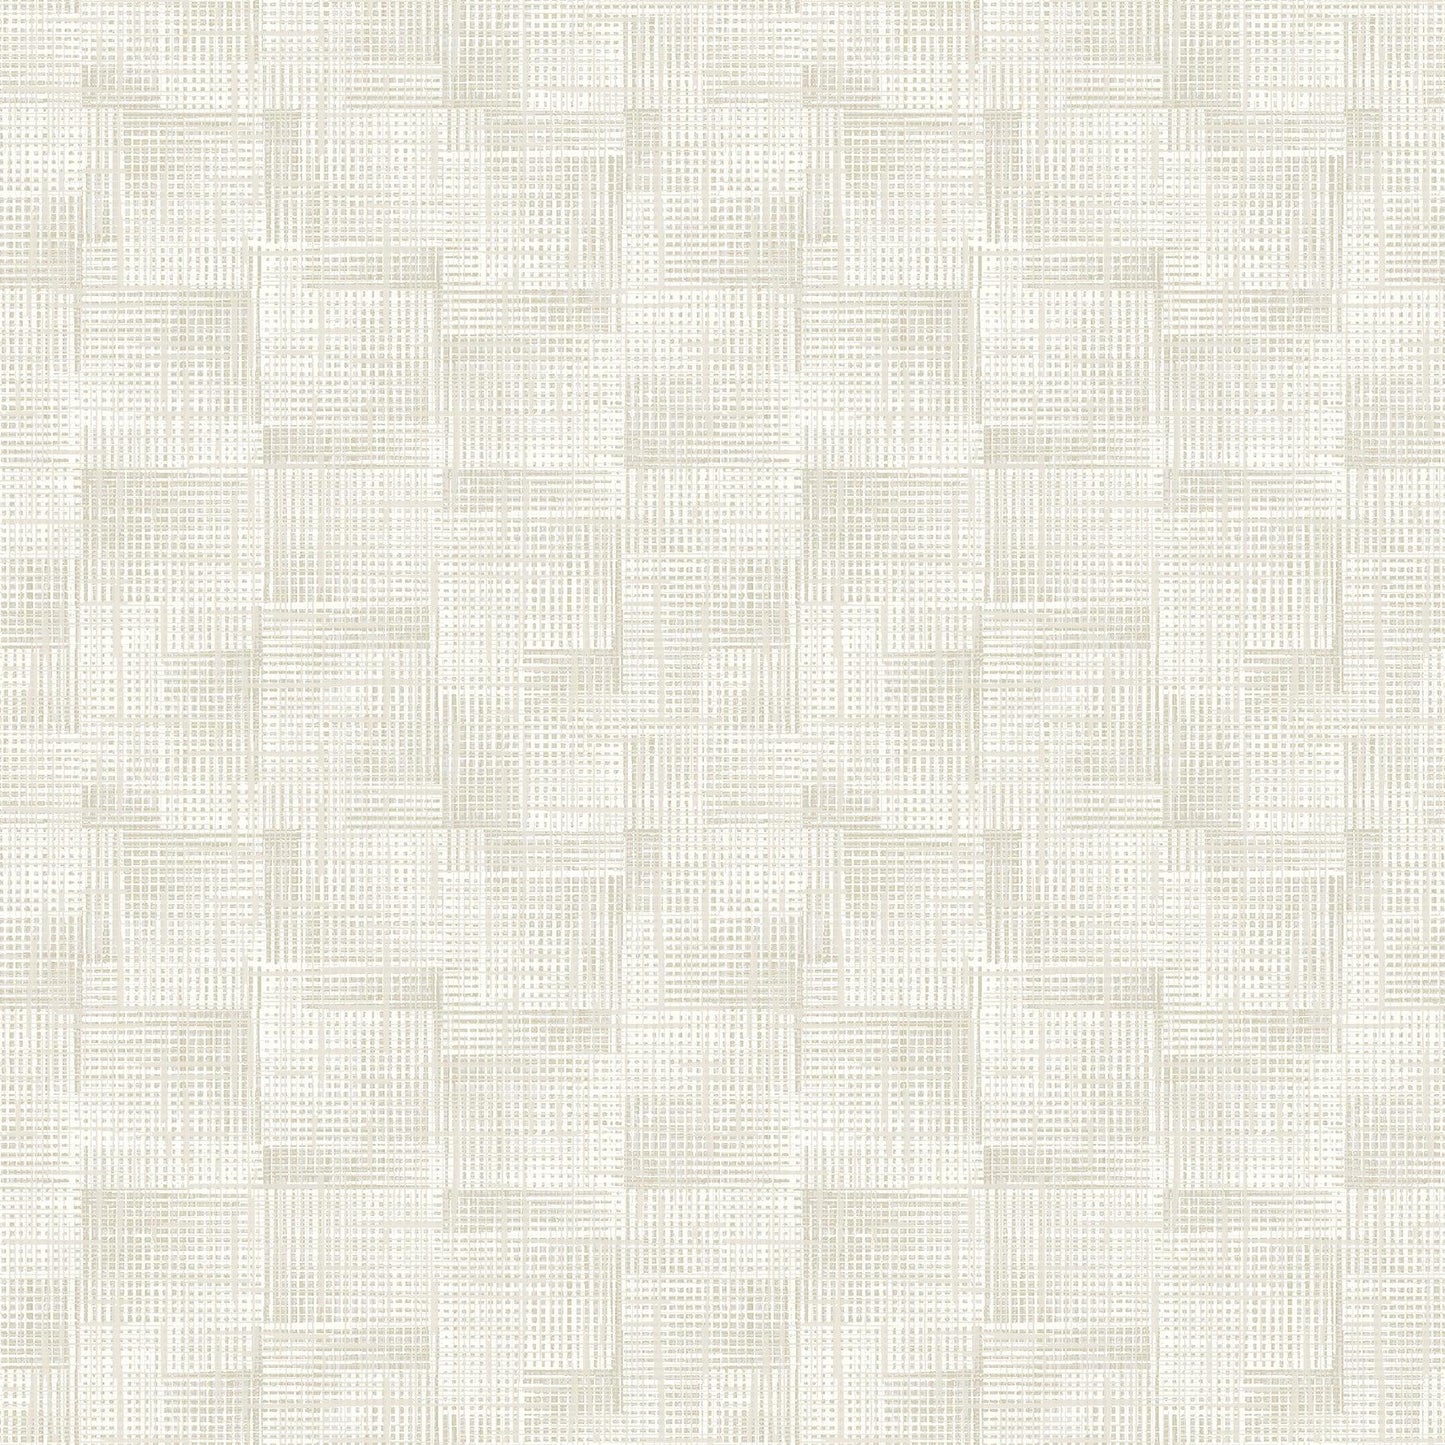 Save on 2971-86161 Dimensions Ting Cream Abstract Woven Cream A-Street Prints Wallpaper